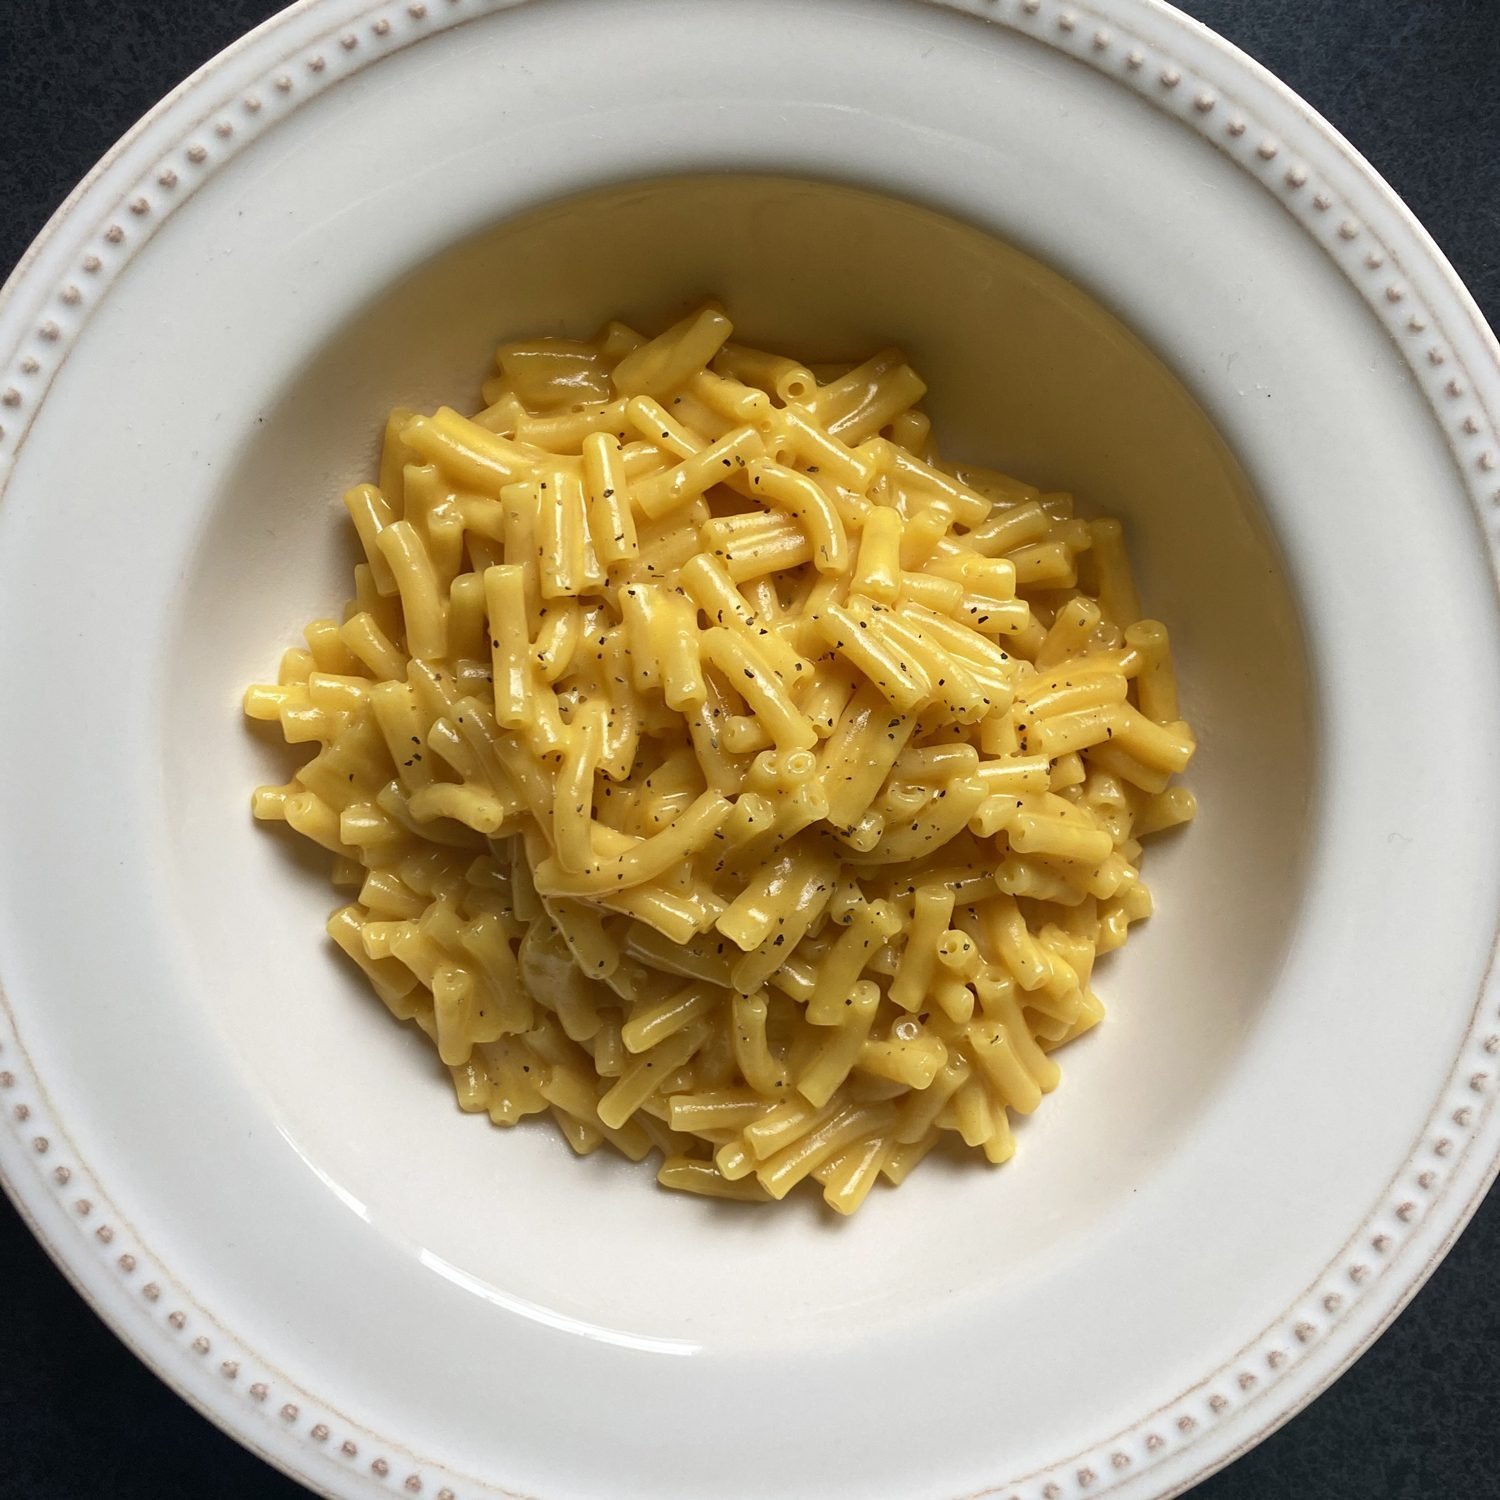 https://www.rd.com/wp-content/uploads/2021/09/tik-tok-mac-and-cheese01_Hannah-Twietmeyer-for-Taste-of-Home.jpg